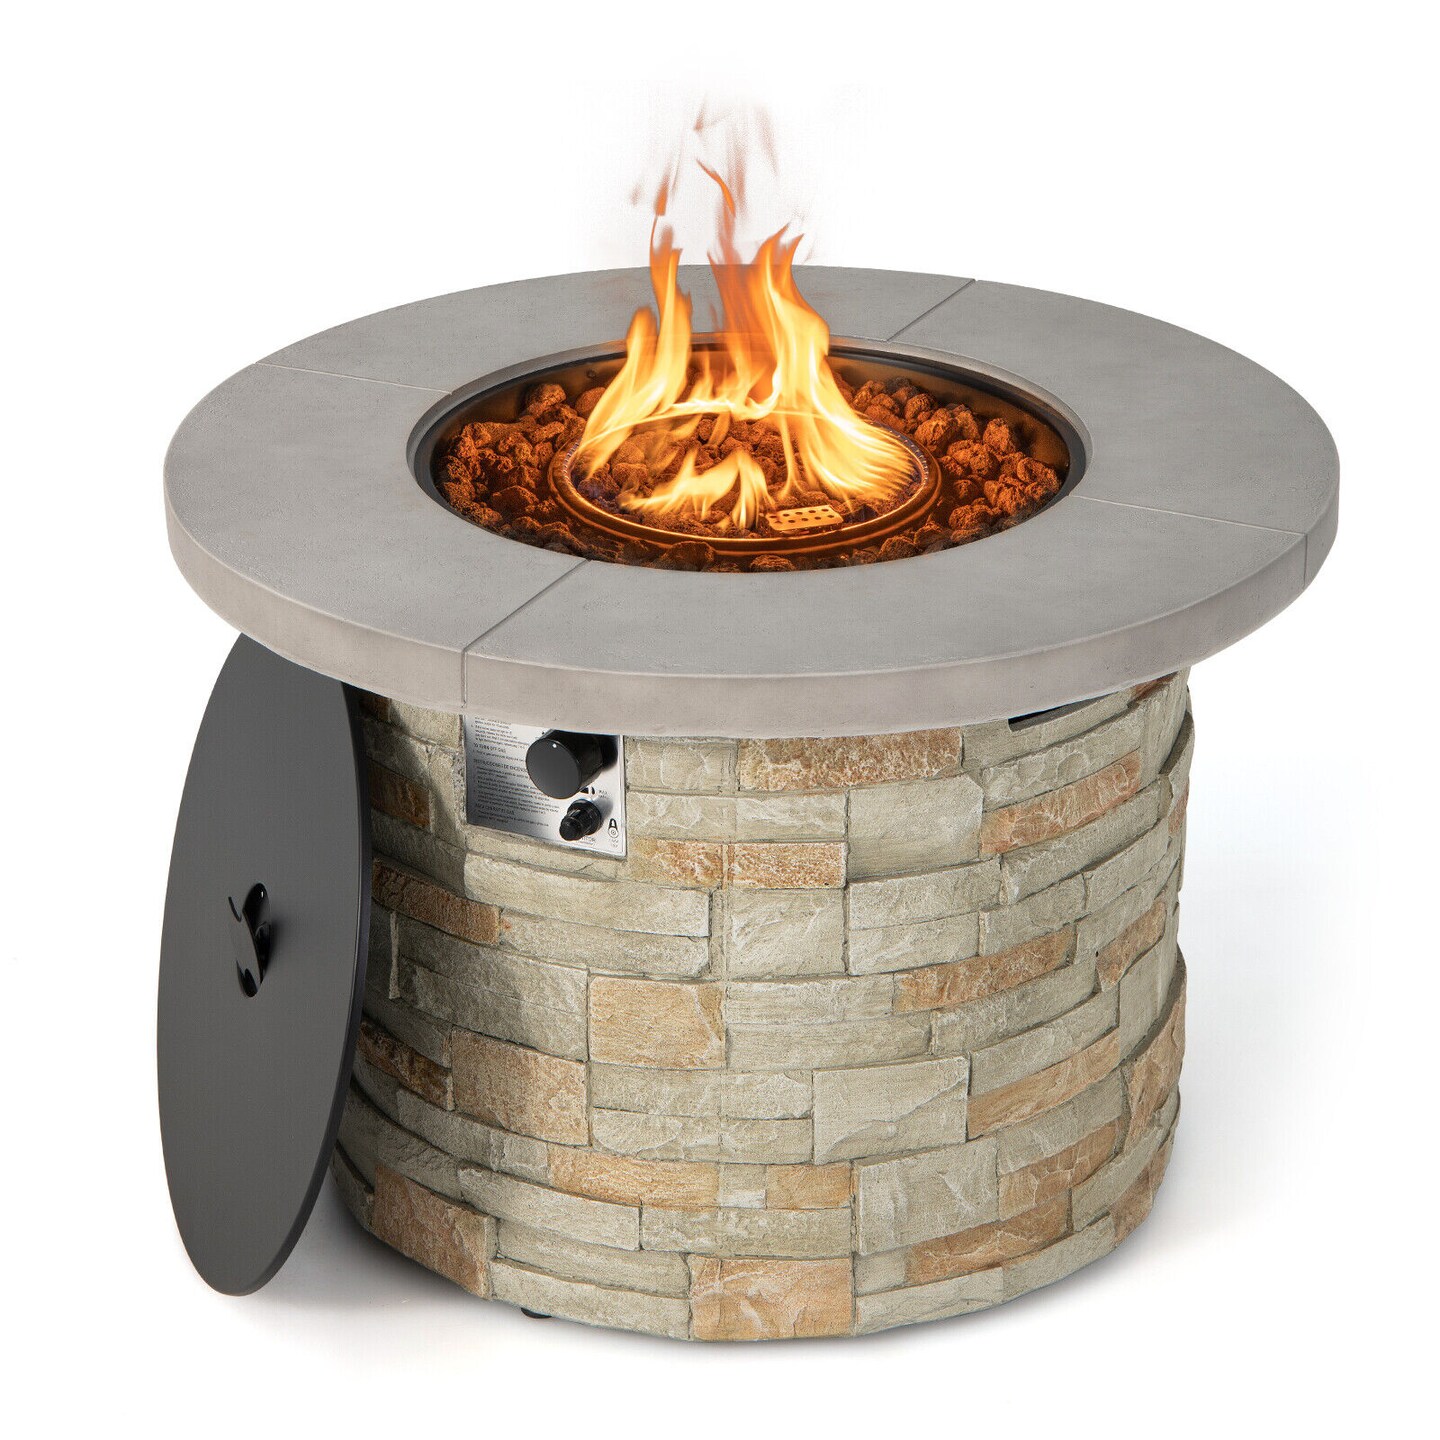 36 Inch Propane Gas Fire Pit Table with Lava Rock and PVC cover-Grey